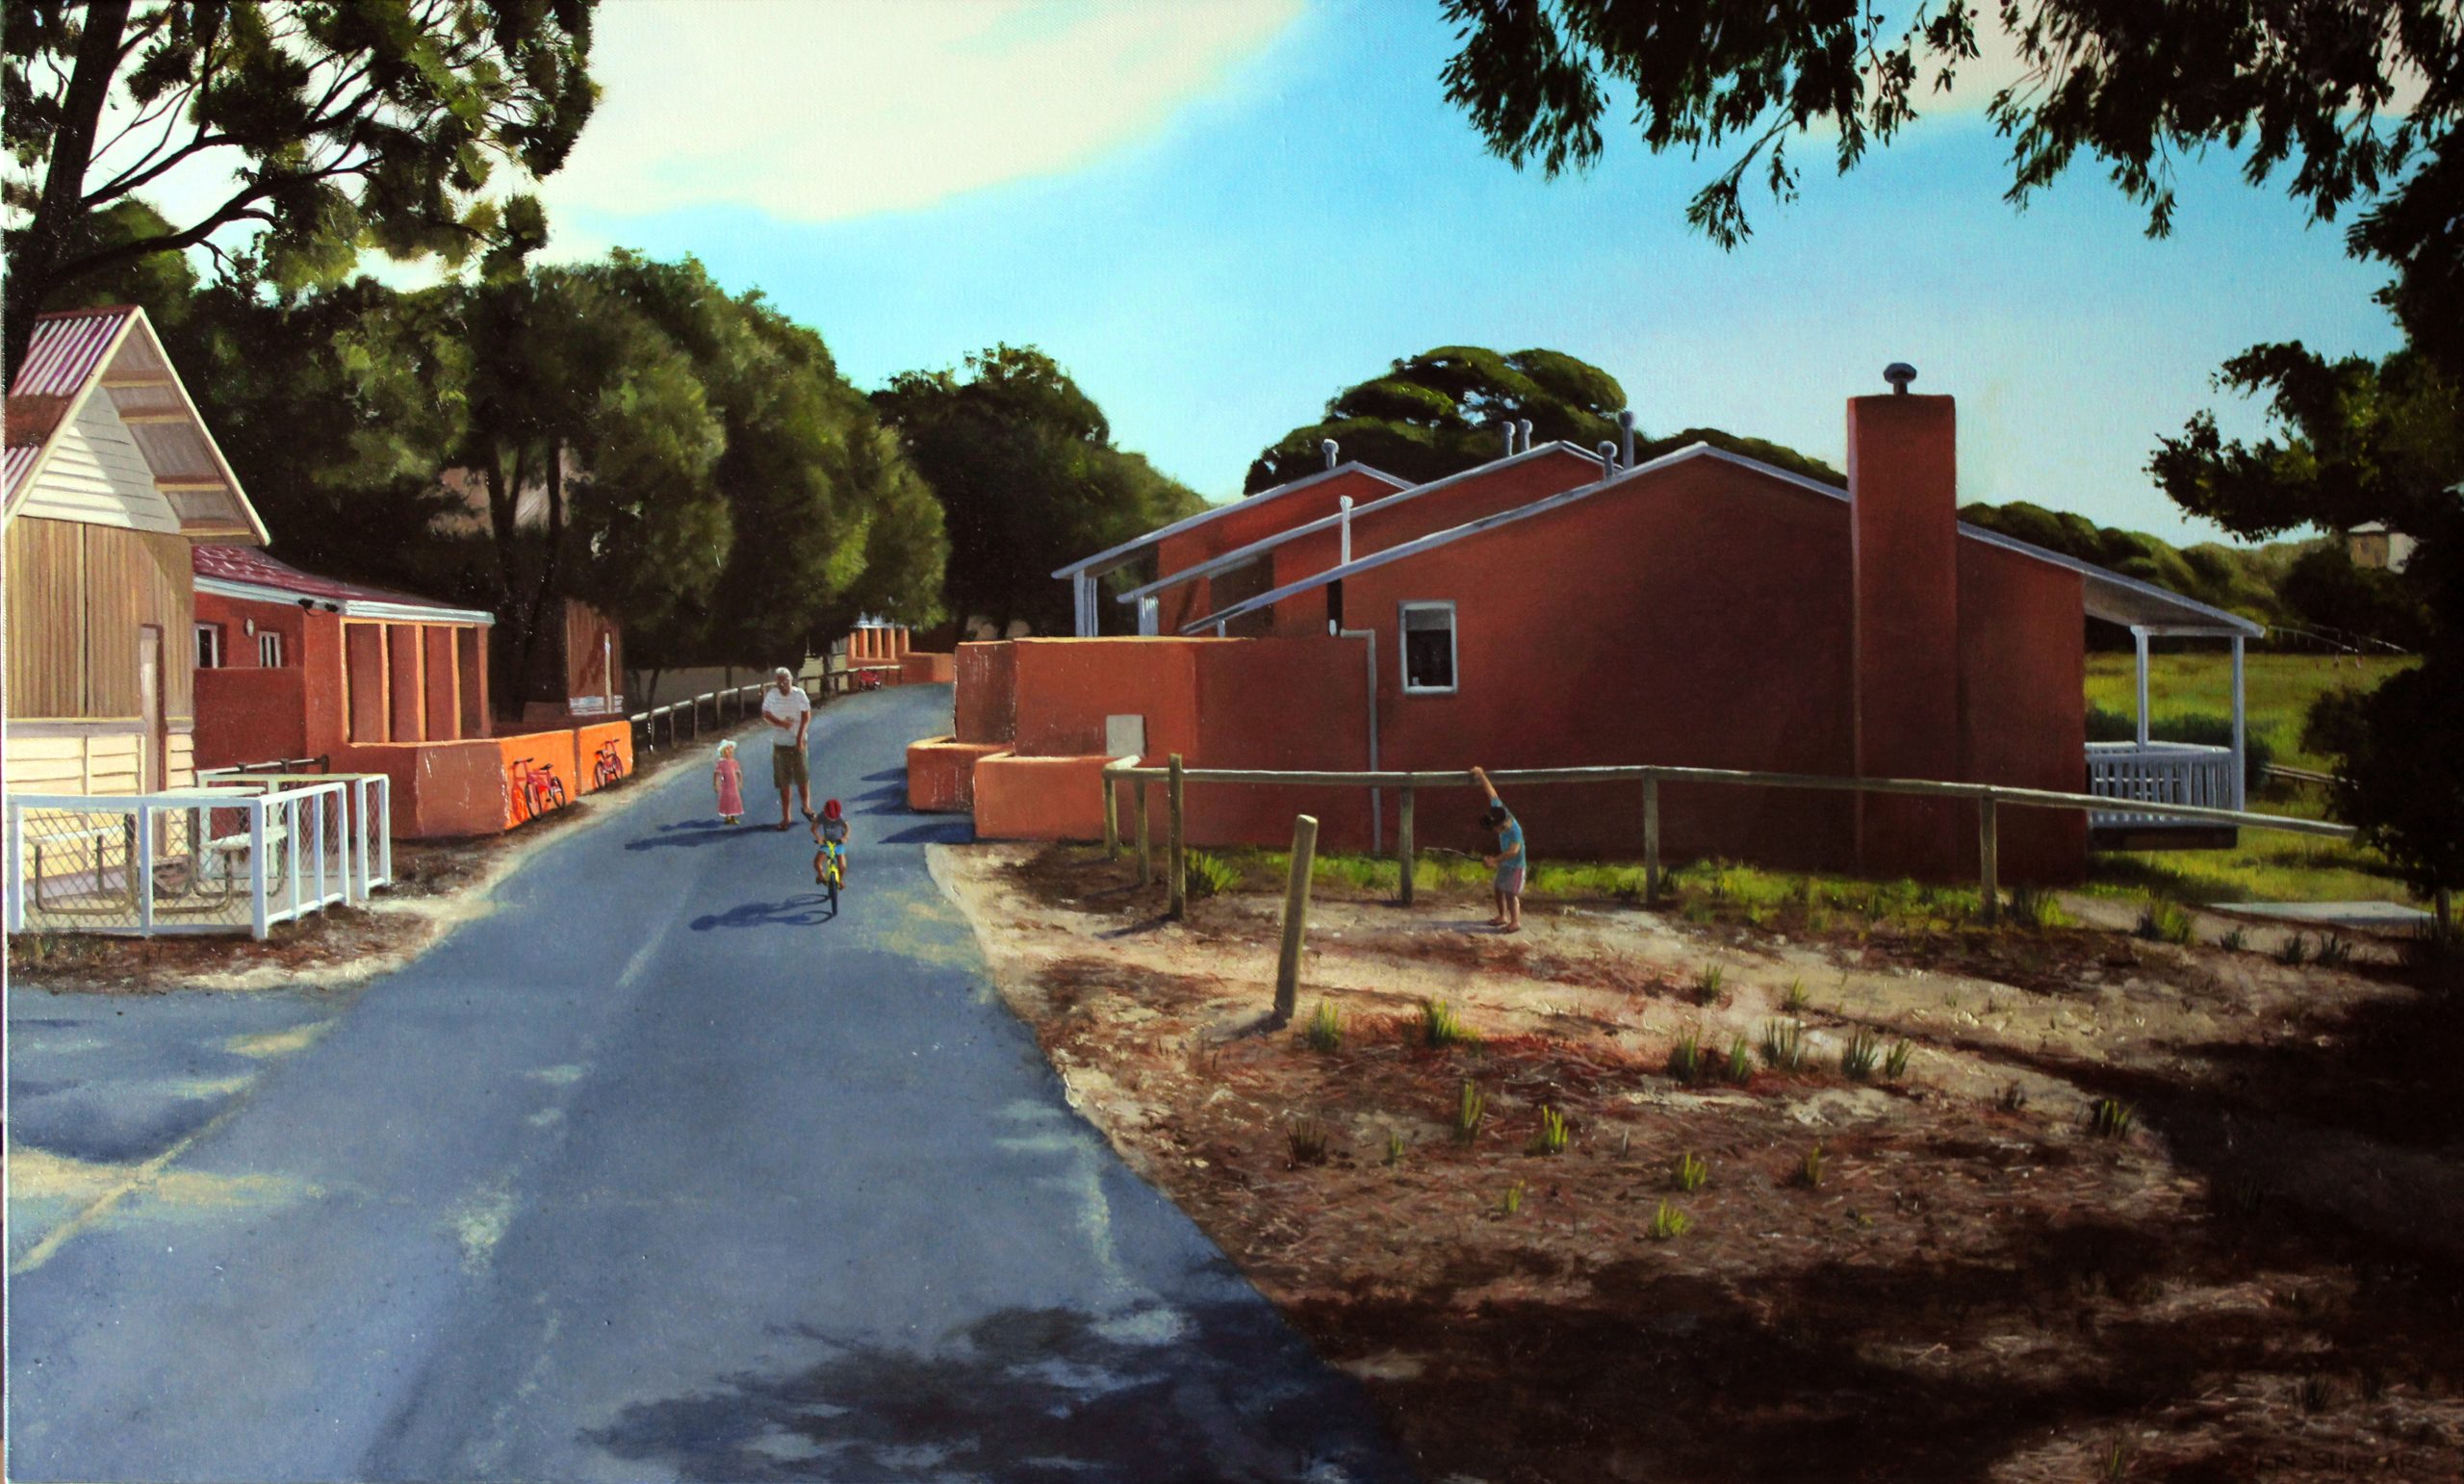 Original oil painting by Ben Sherar of the cottages on Vlamingh way Rottnest Island Perth WA